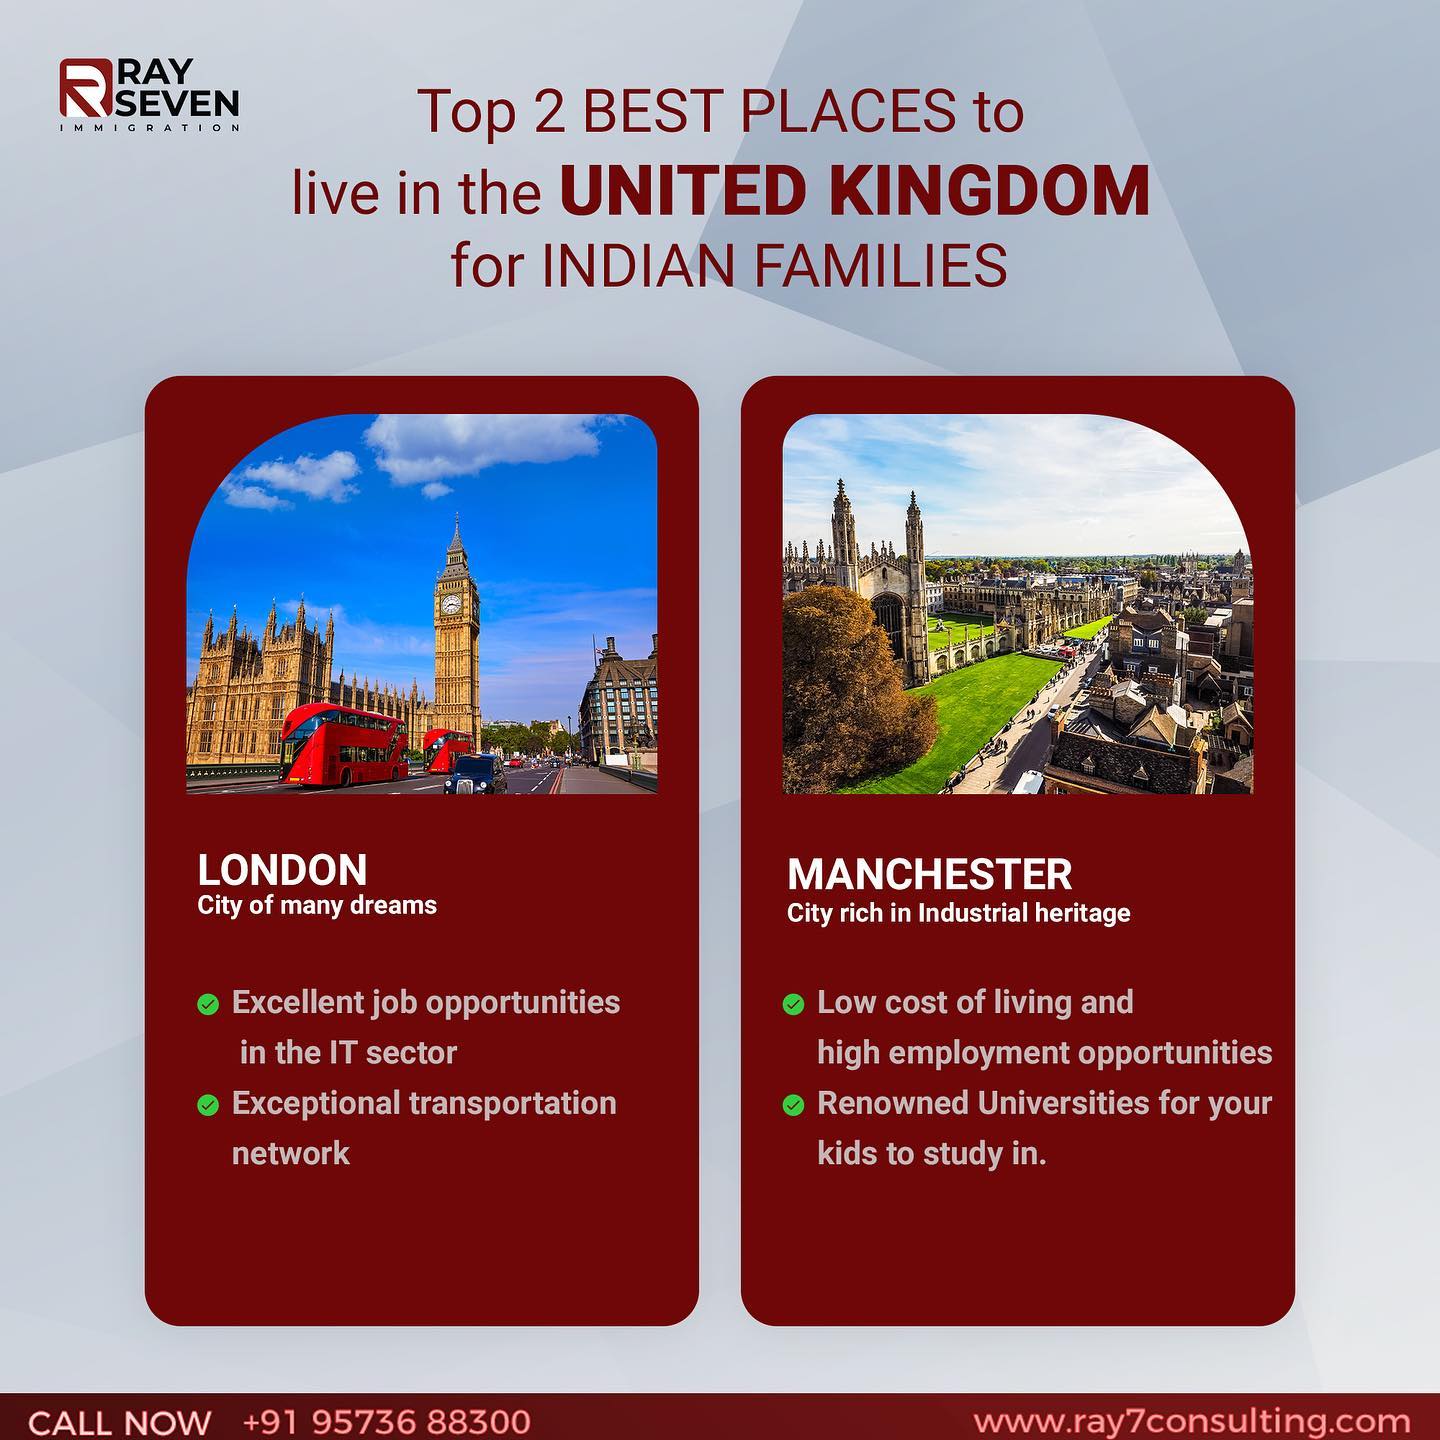 Two top cities where Indians prefer to settle are London and Manchester due to IT job opportunities and good settlement options for families. So what are you waiting for? 

#UK #London #manchester #UKimmigration #UK #workinuk #workabroad #work #jobsearch #jobs #UkJobs #ukjobseekers #migratetoUK #immigration #UnitedKingdomimmigration #unitedkingdom